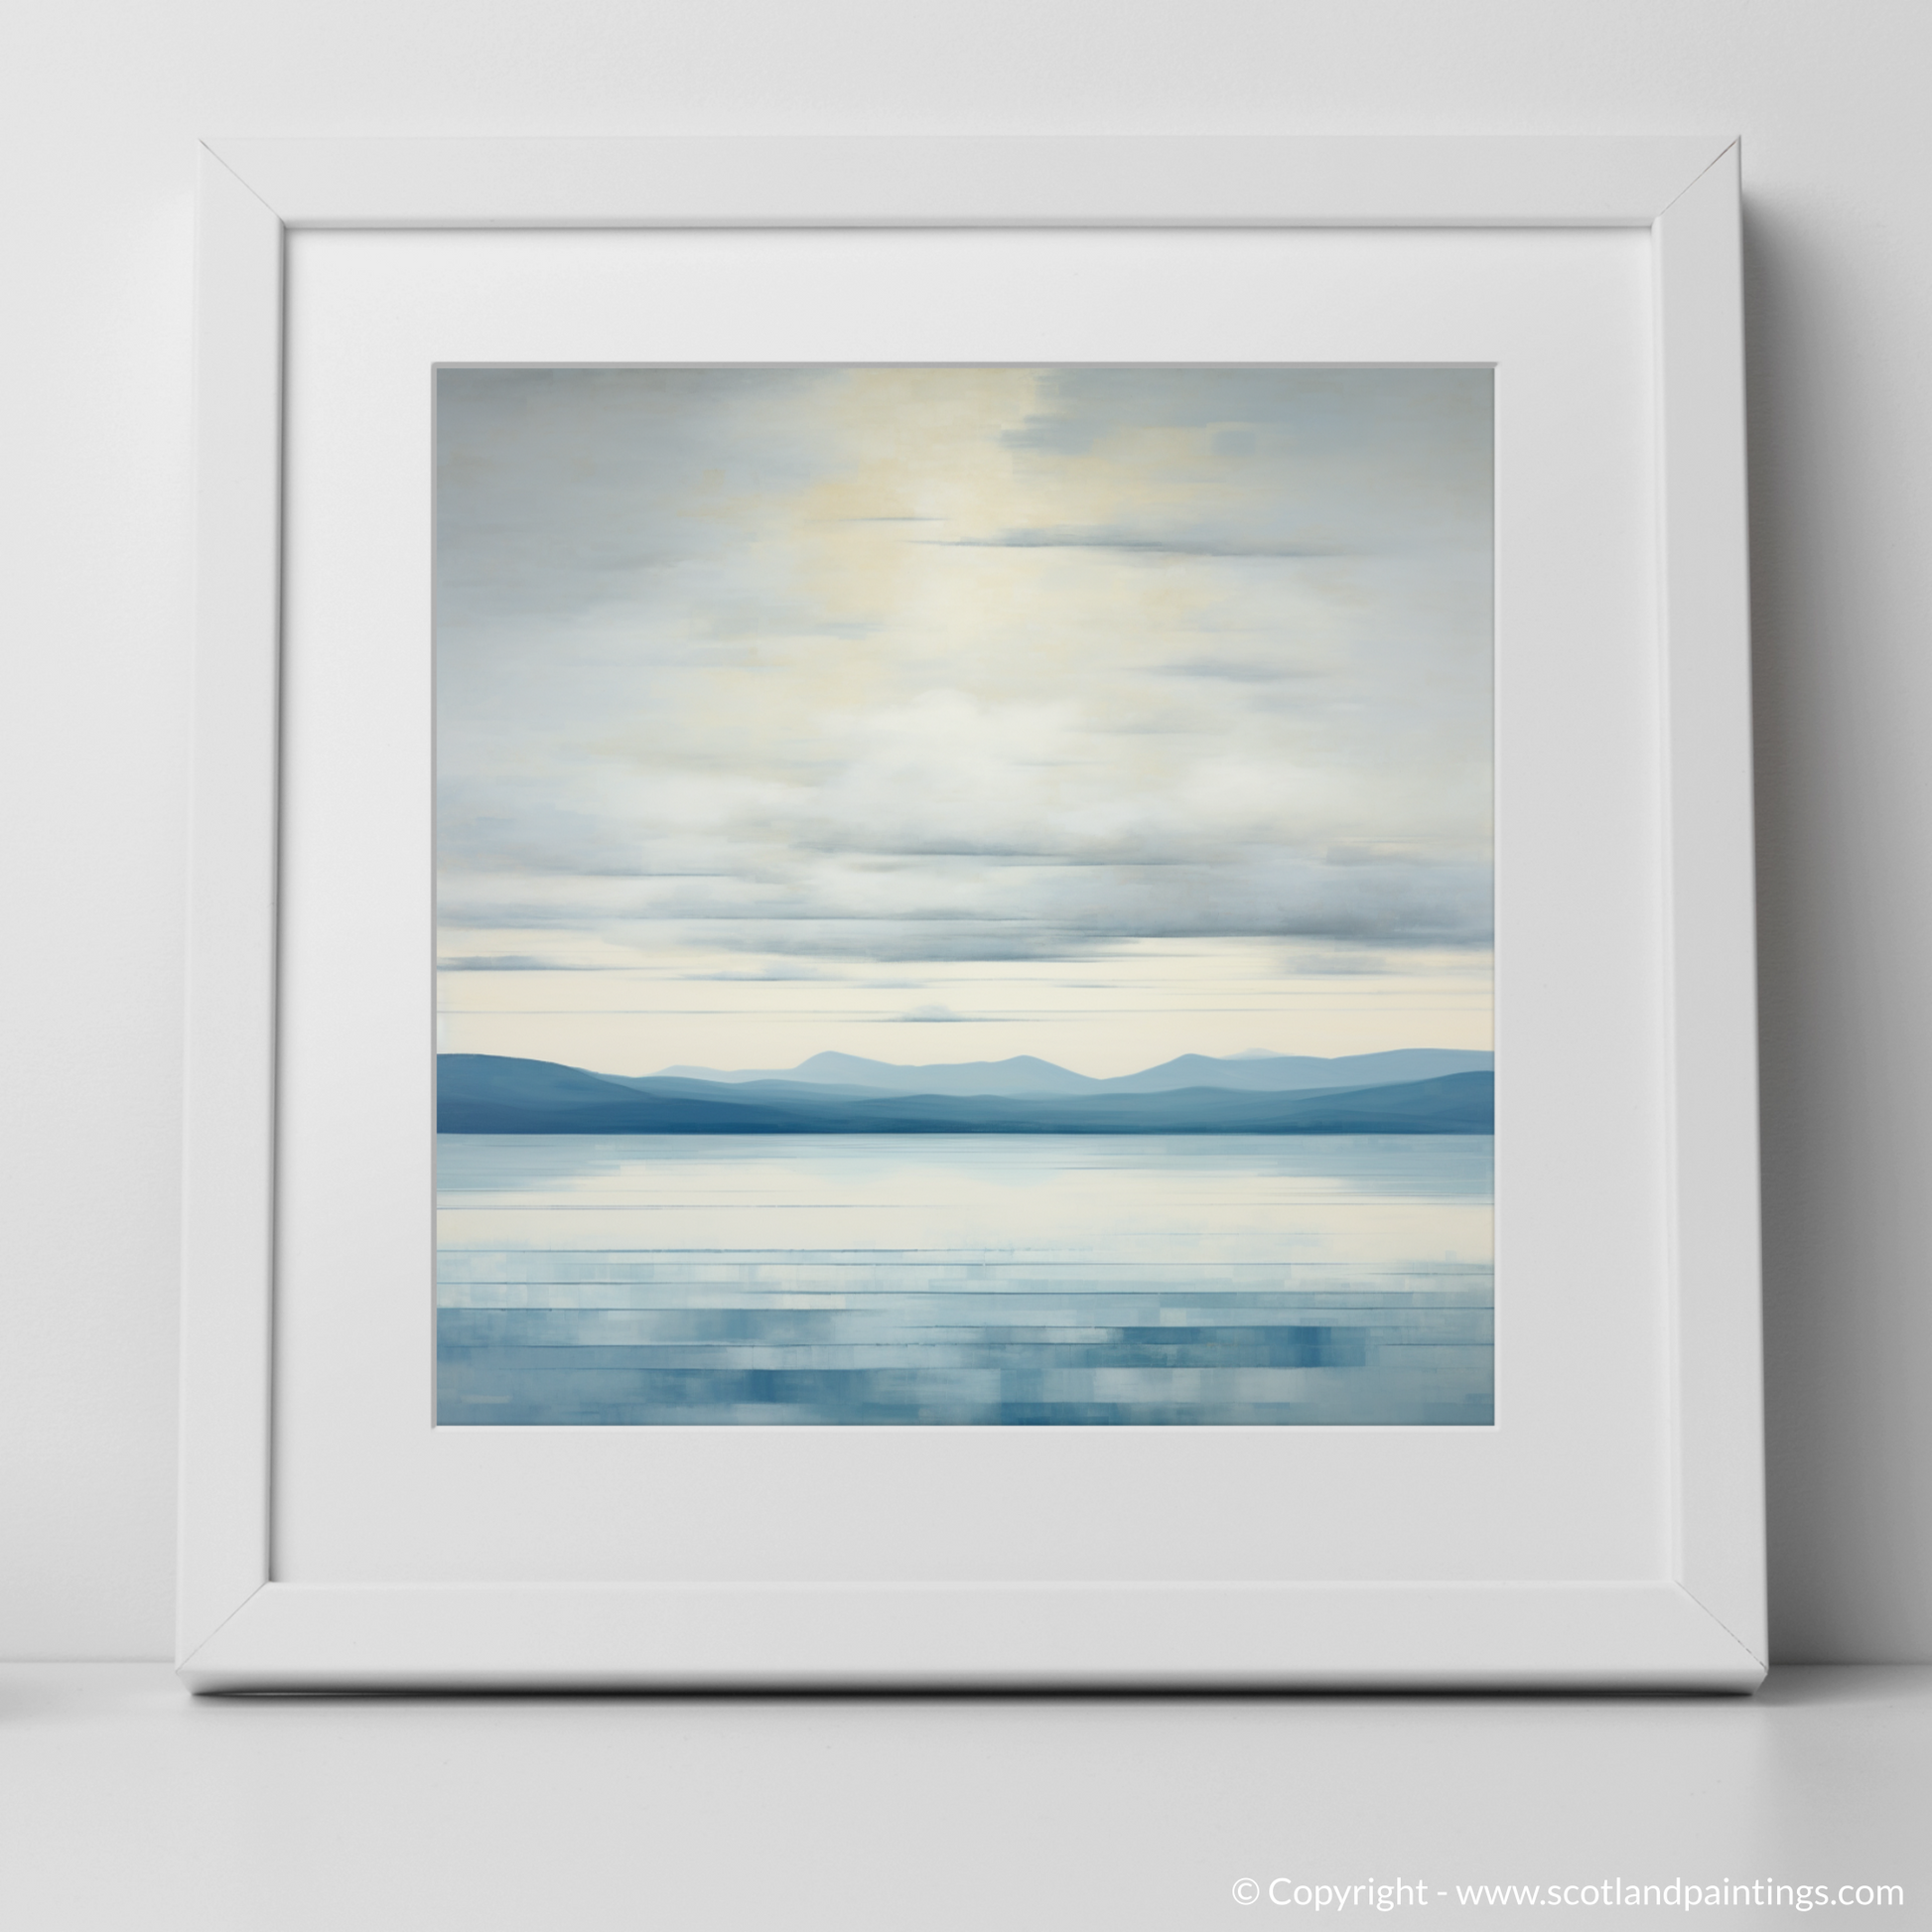 Art Print of A huge sky above Loch Lomond with a white frame